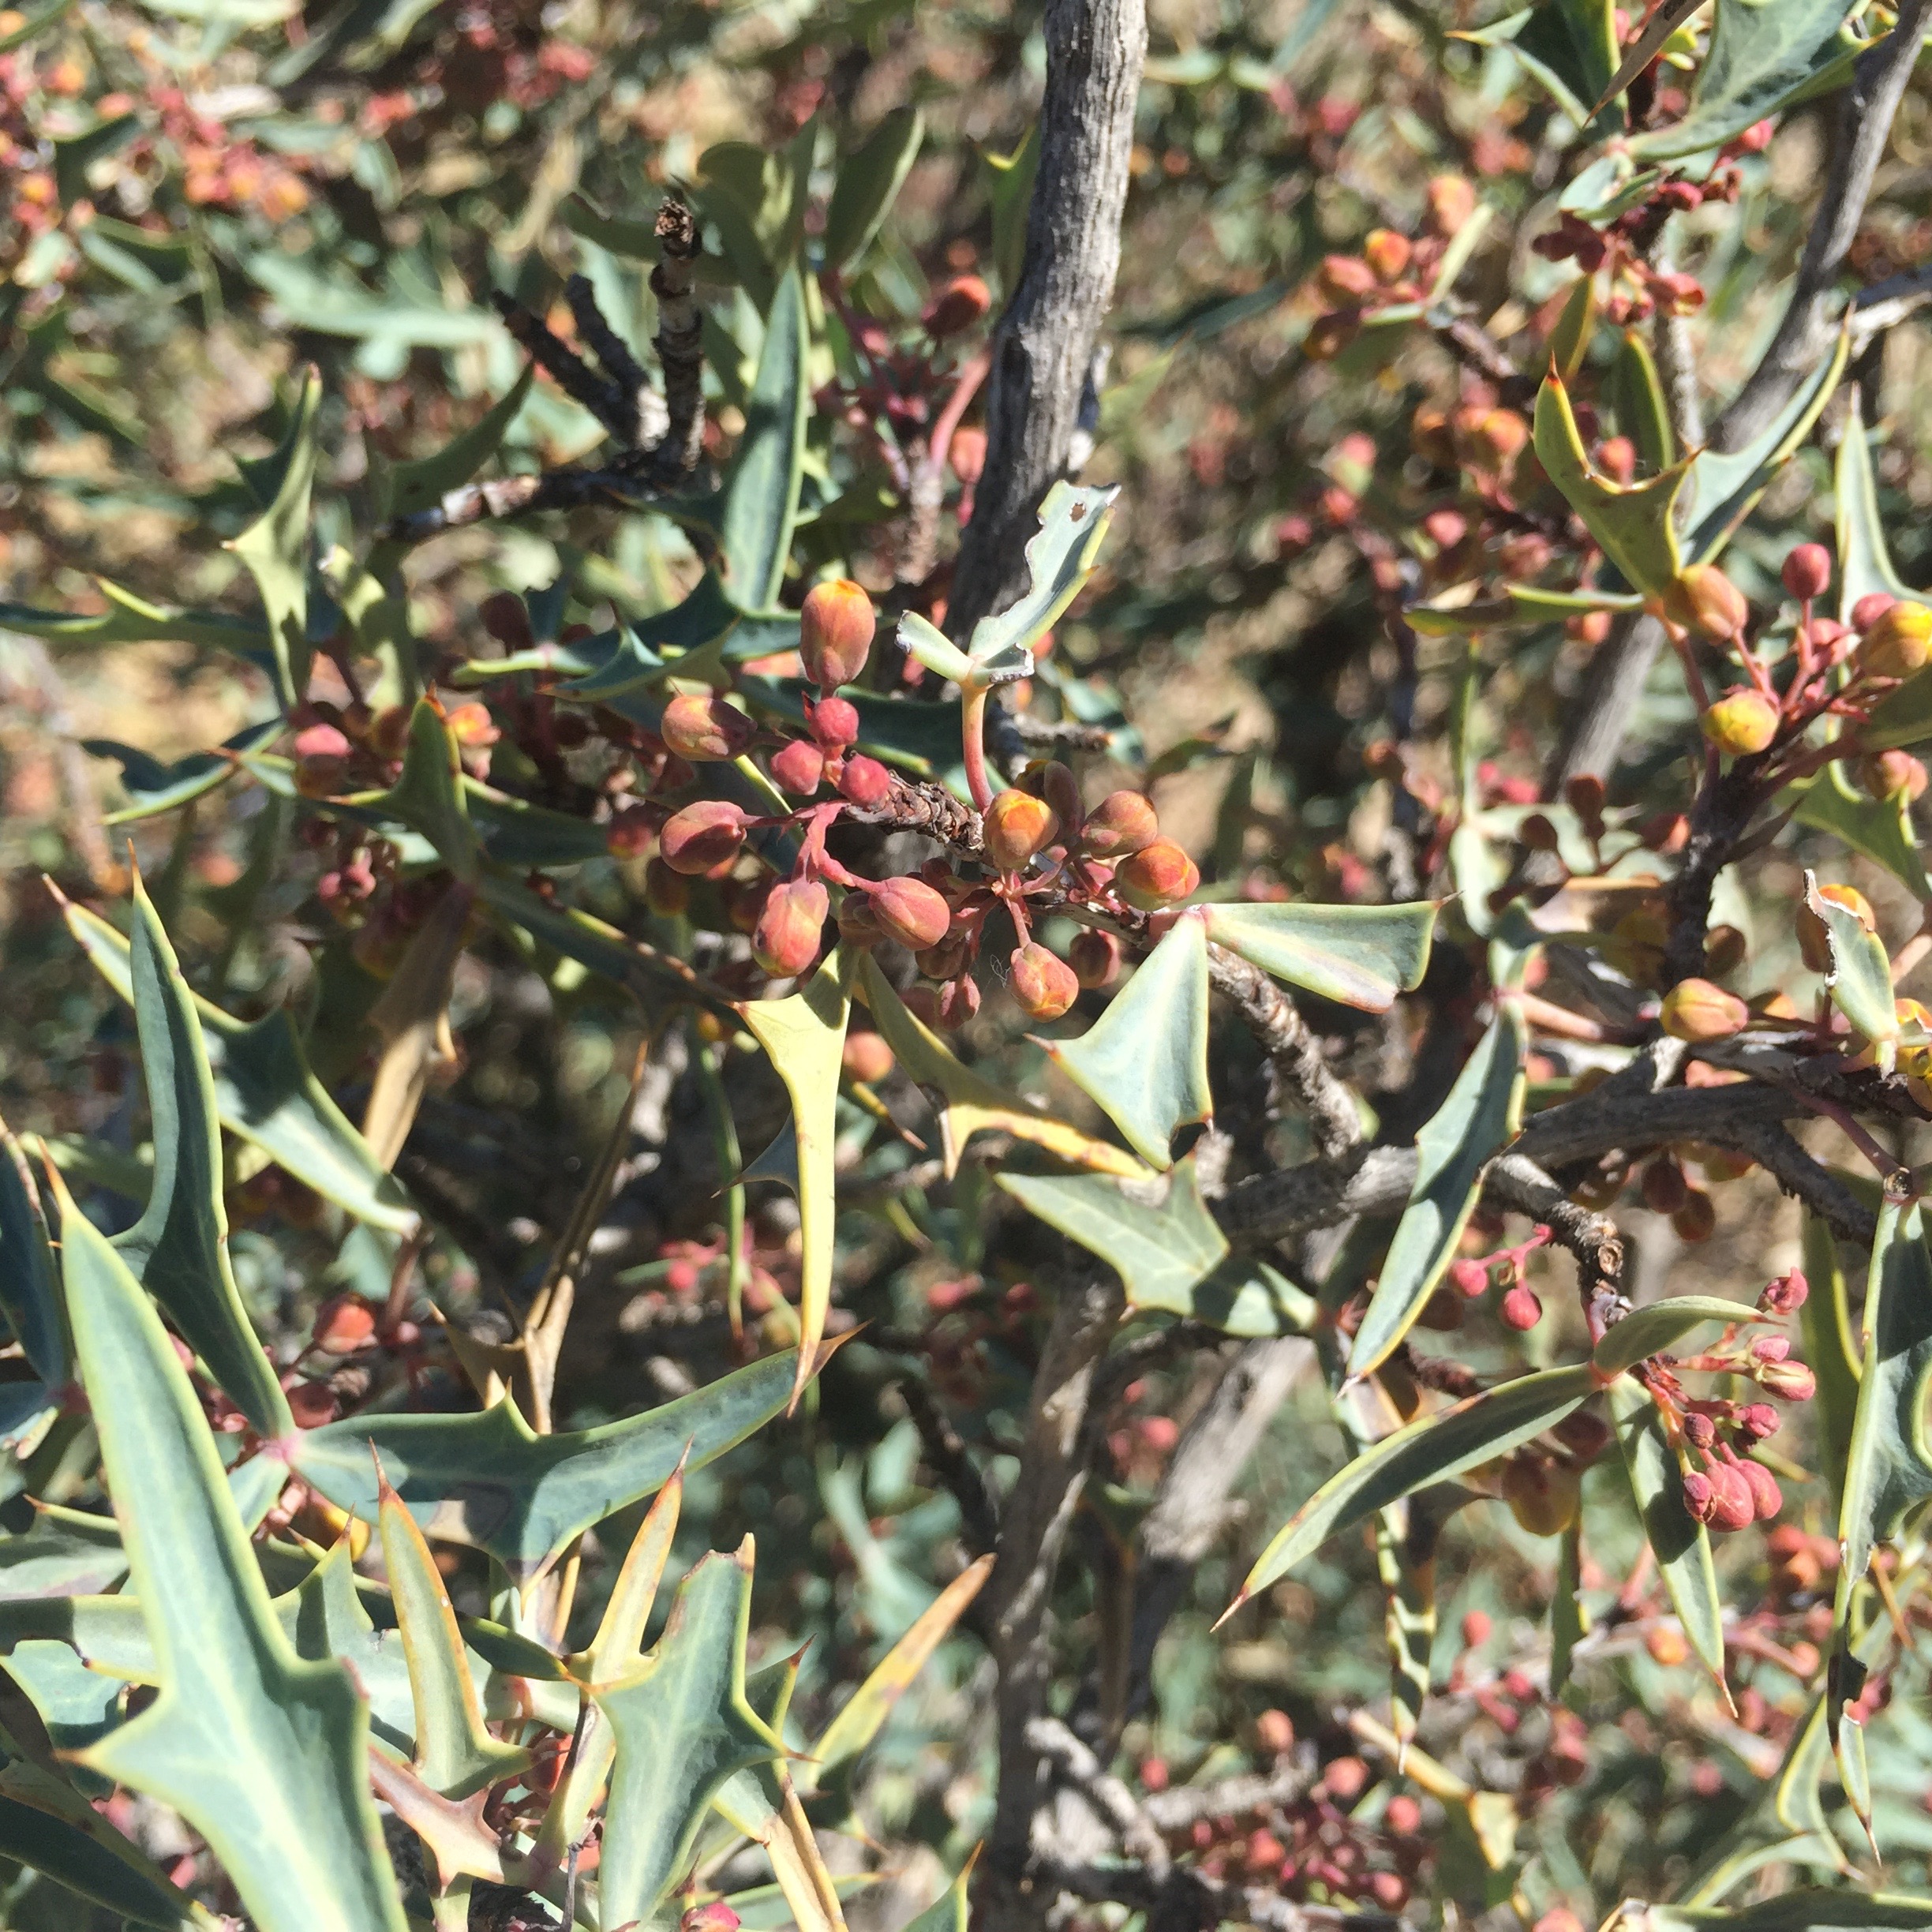 Ripening berries and spine-tipped foliage